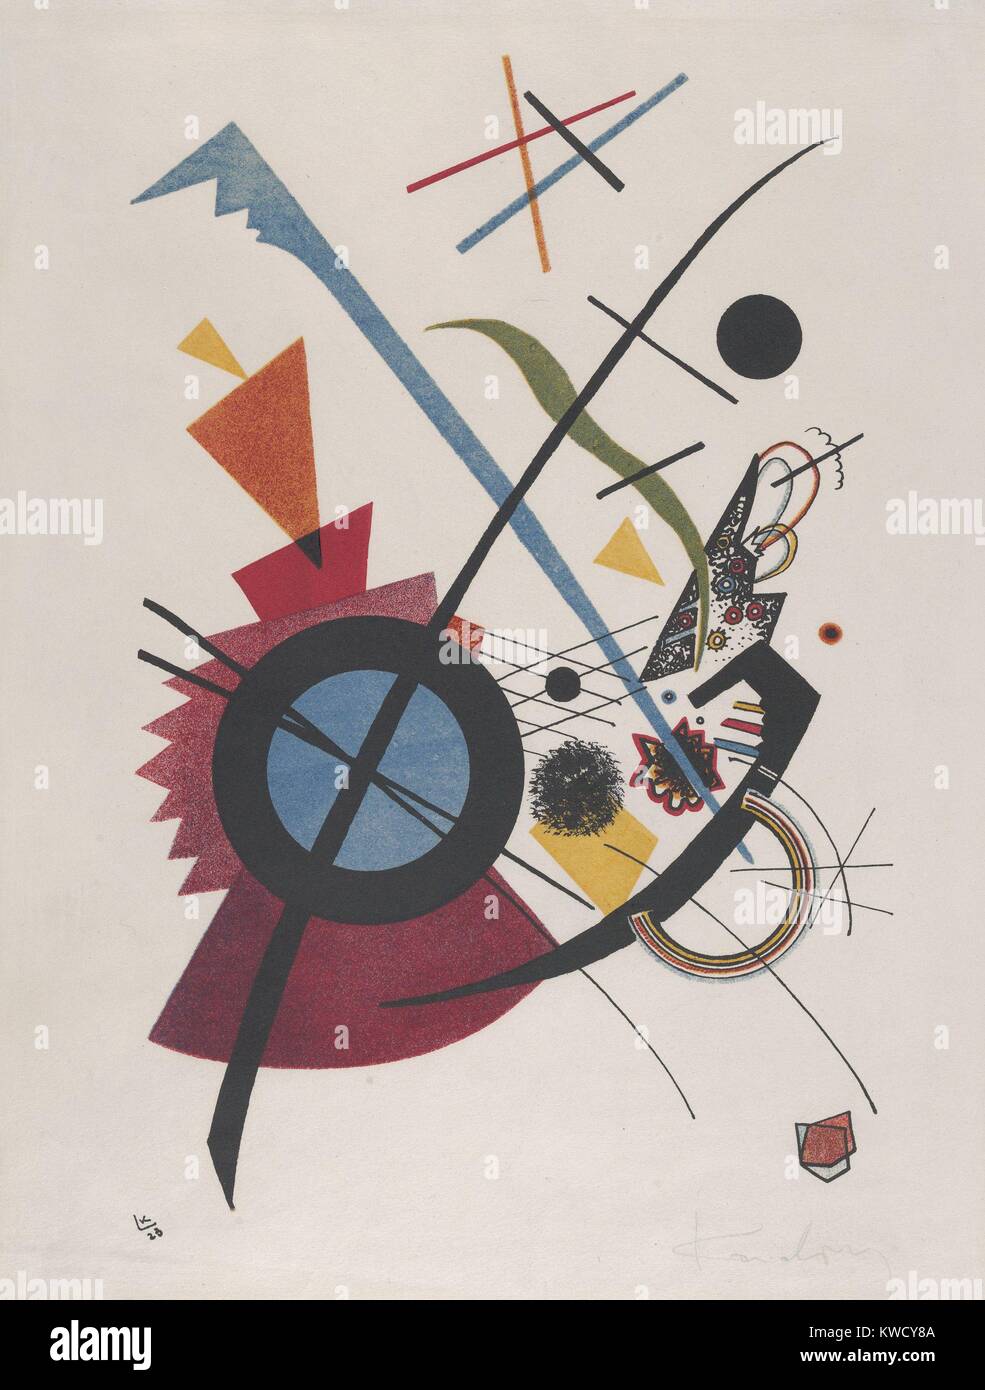 Violett, by Vasily Kandinsky, 1923, Russian French Expressionist print, lithograph. Geometrical elements, circles, arcs, triangles, straight lines and curves, mix with irregular hand drawn forms in this abstract lithograph (BSLOC 2017 5 148) Stock Photo